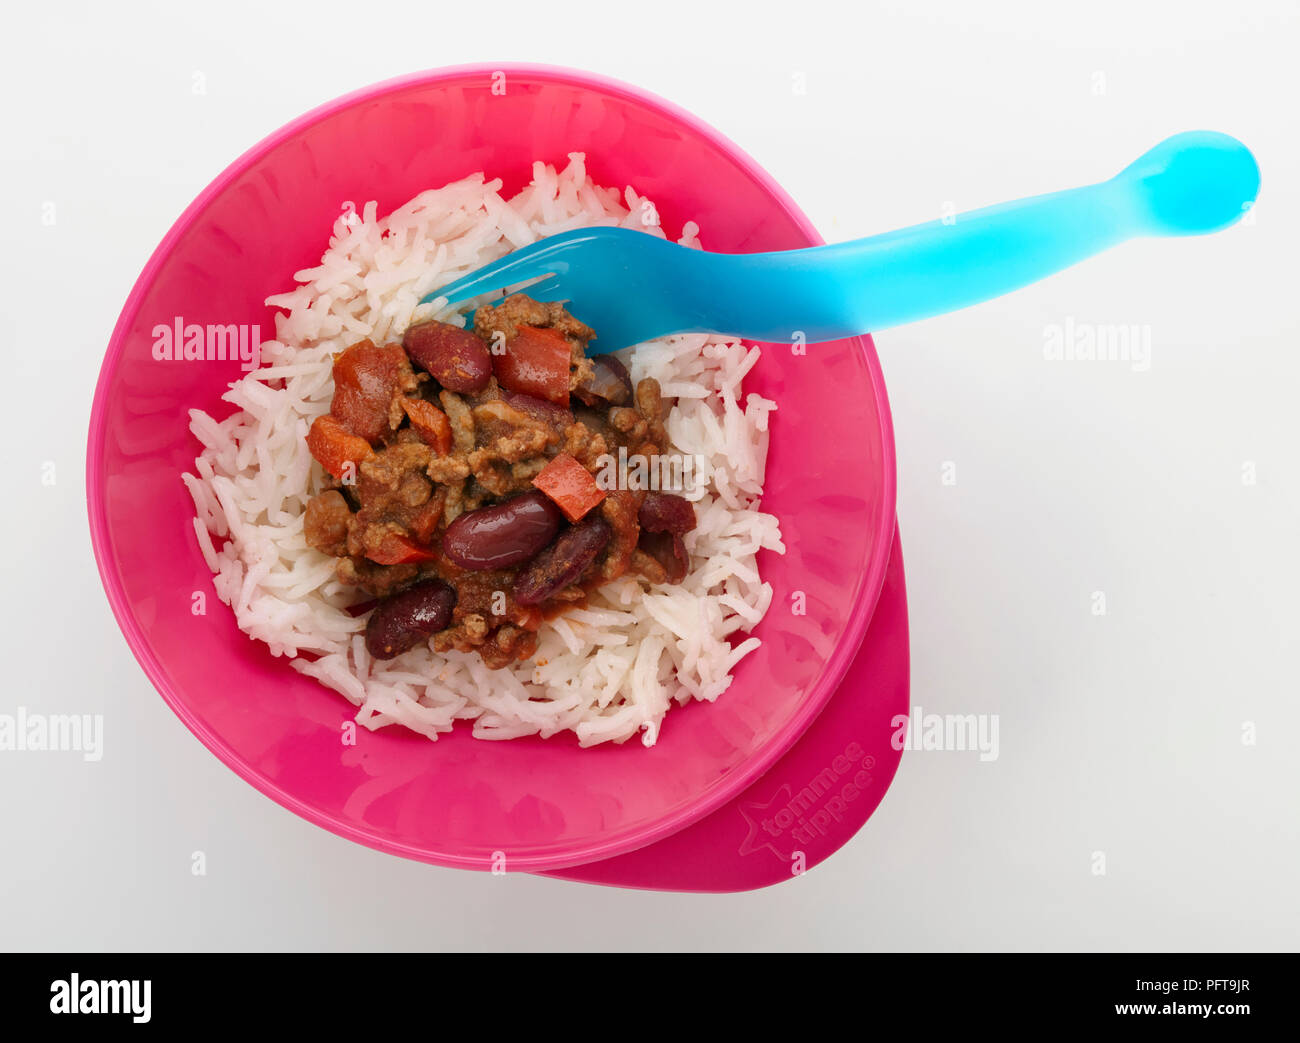 Chilli con carne with rice, baby food Stock Photo